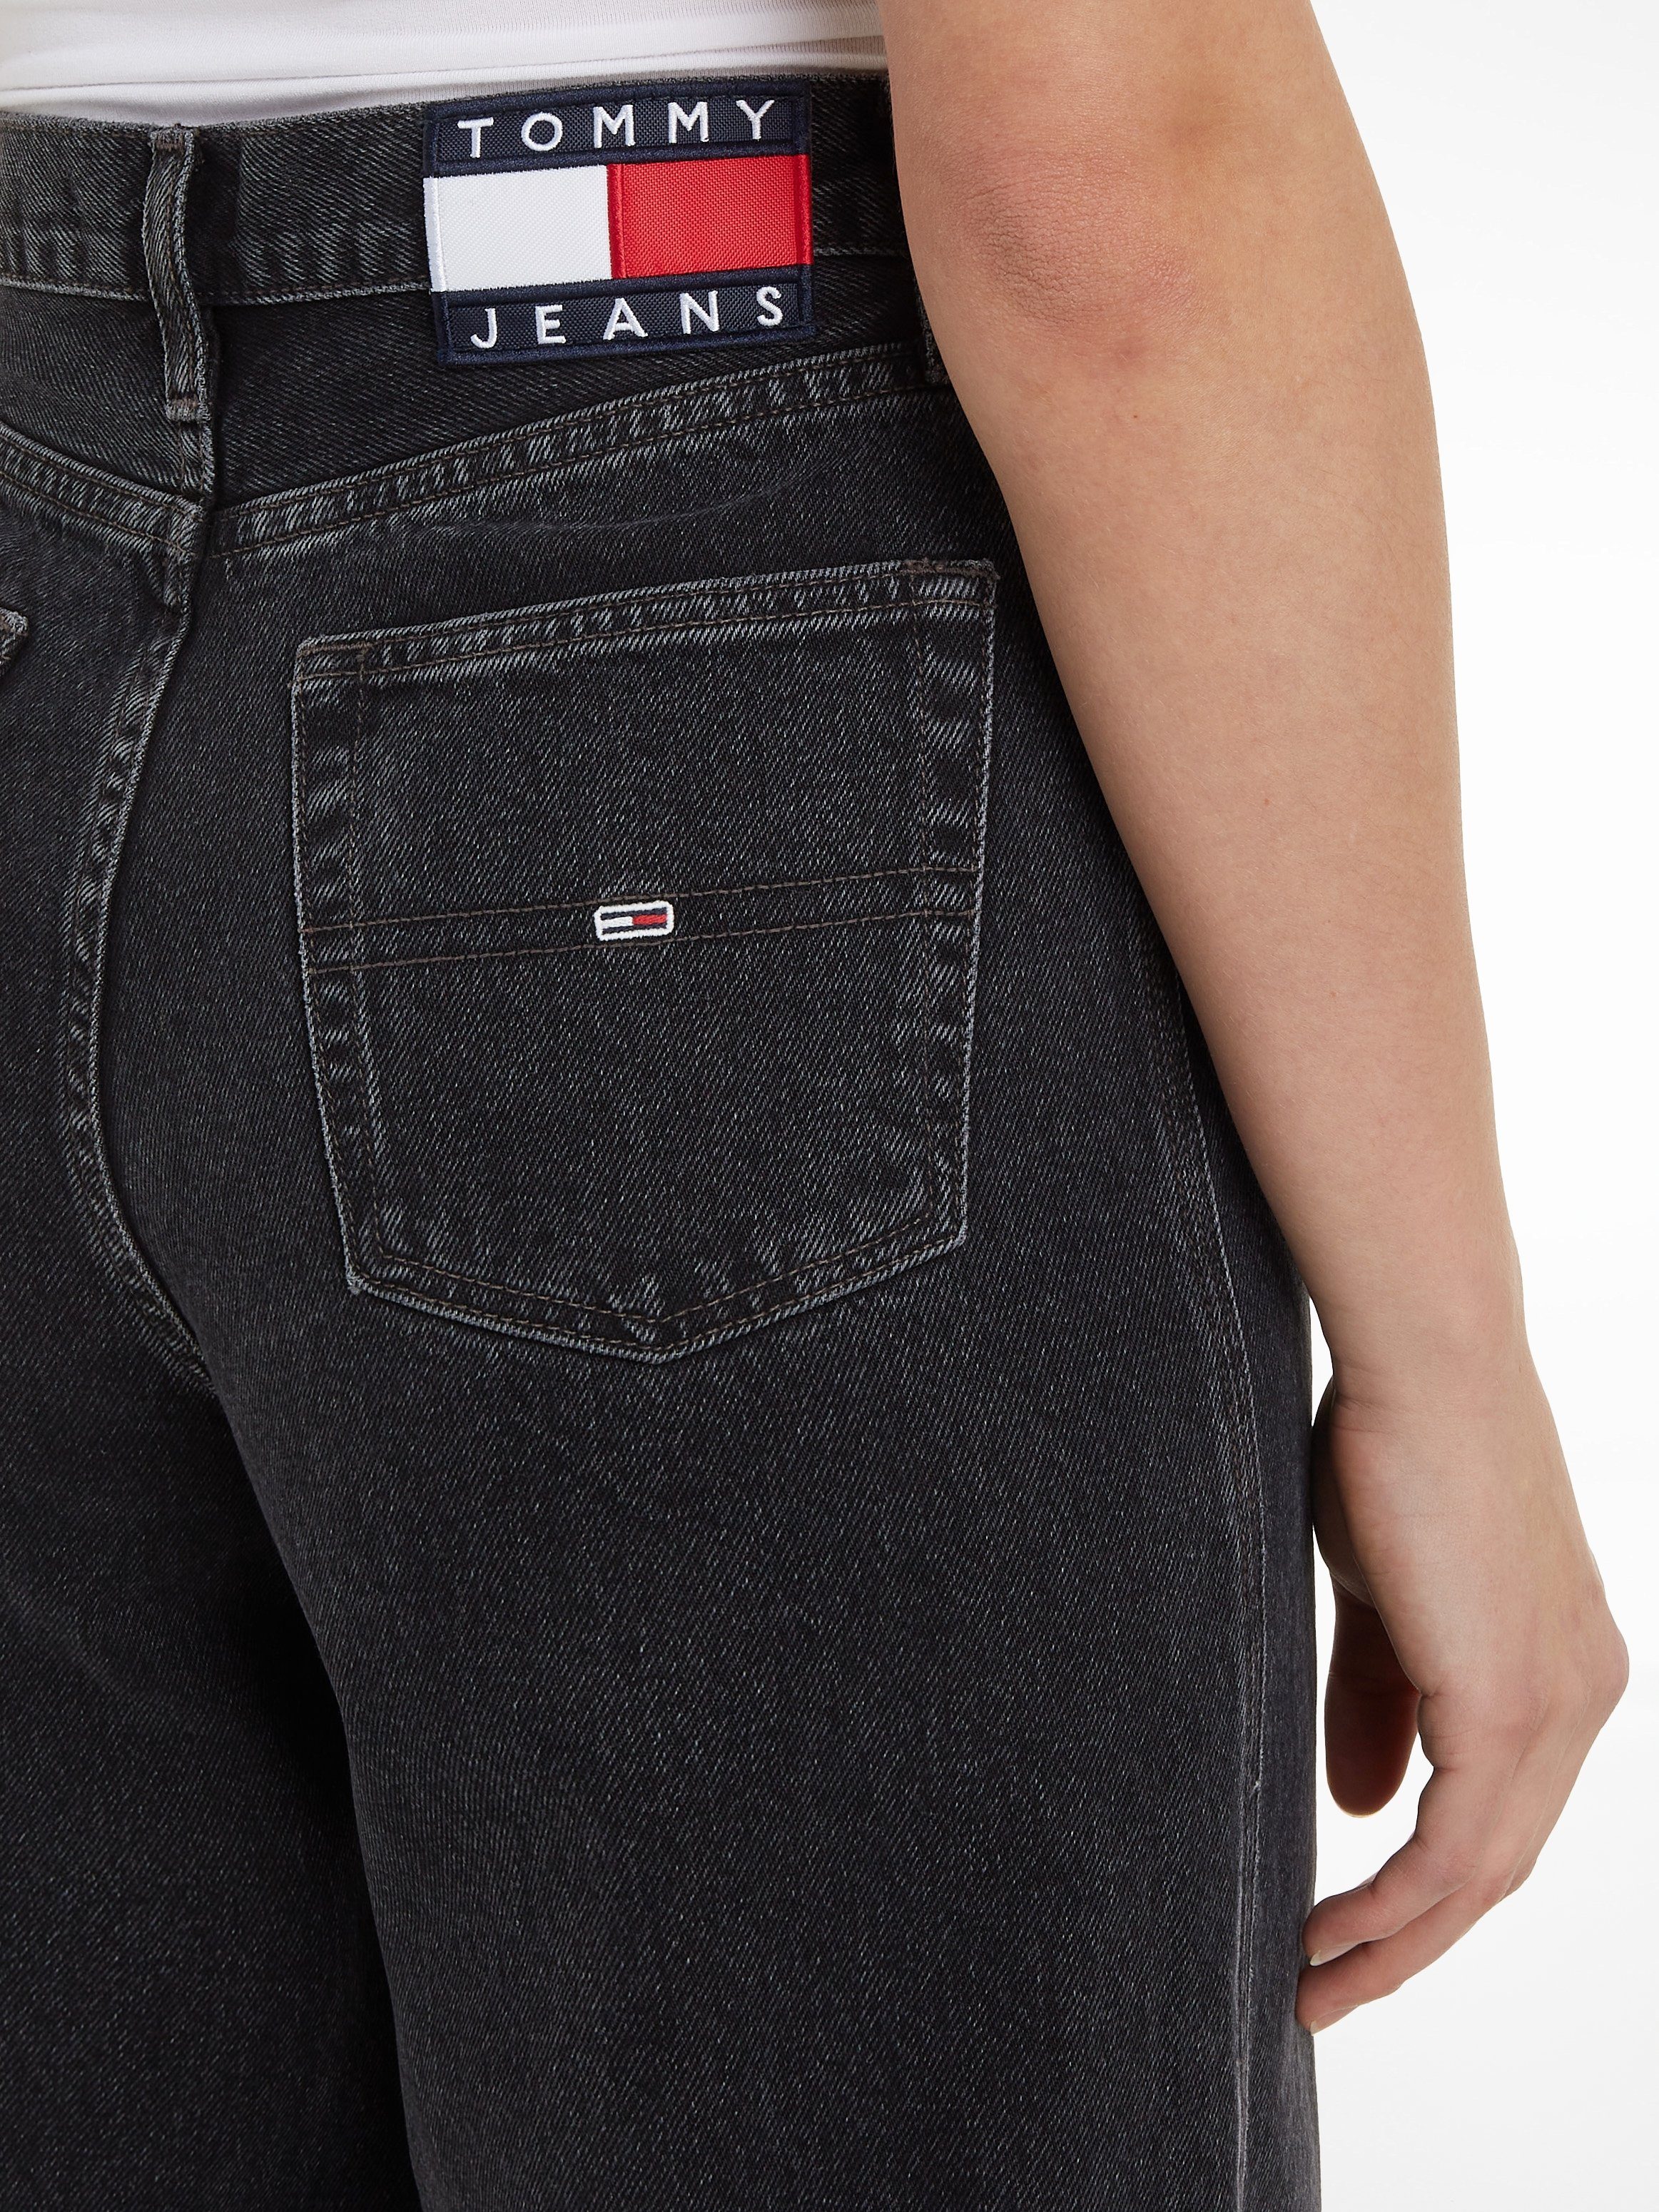 Tommy Jeans Weite Jeans mit black Jeans Tommy Logobadges